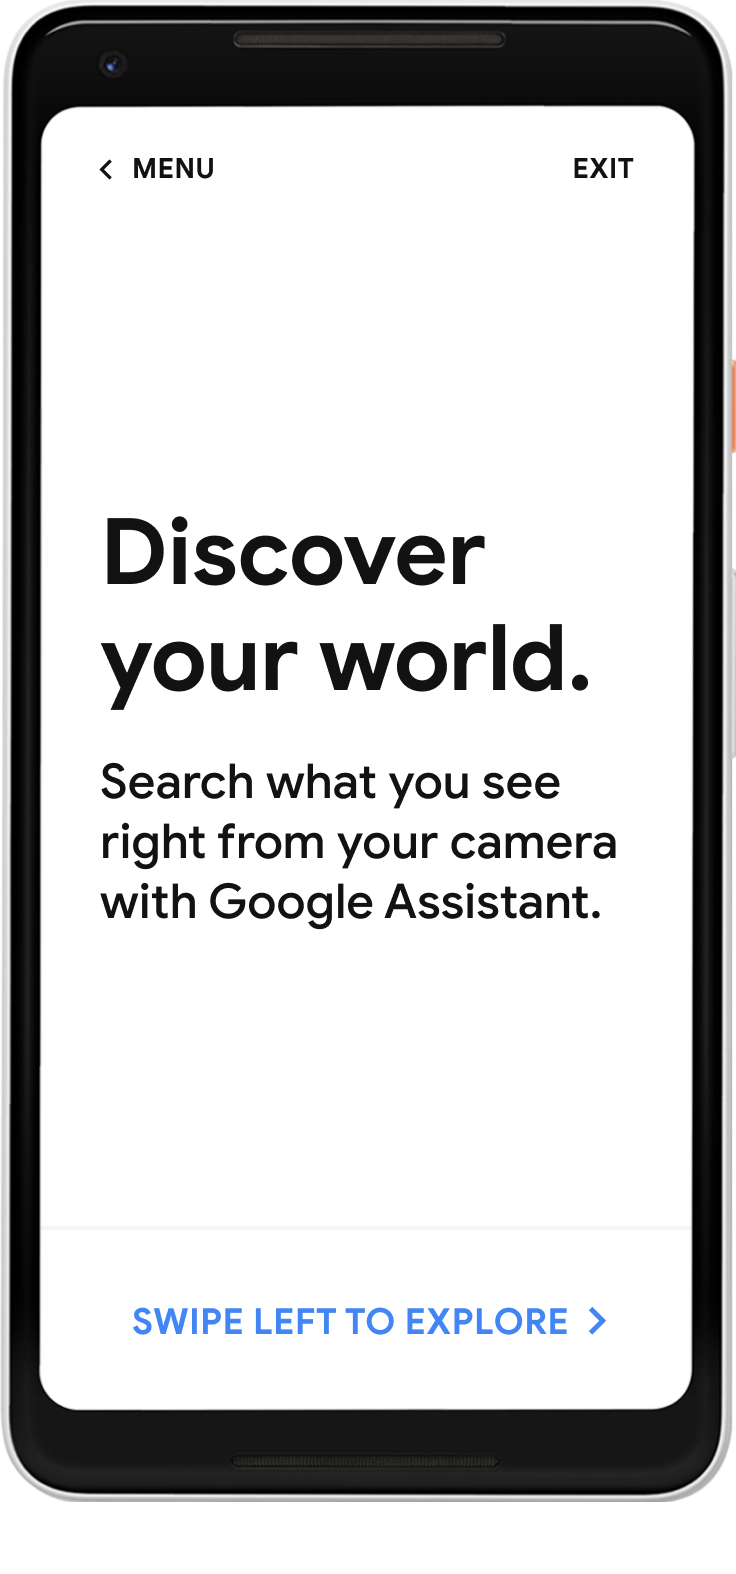 Intro to Google Assistant feature group with a CTA to 'Swipe left to explore'